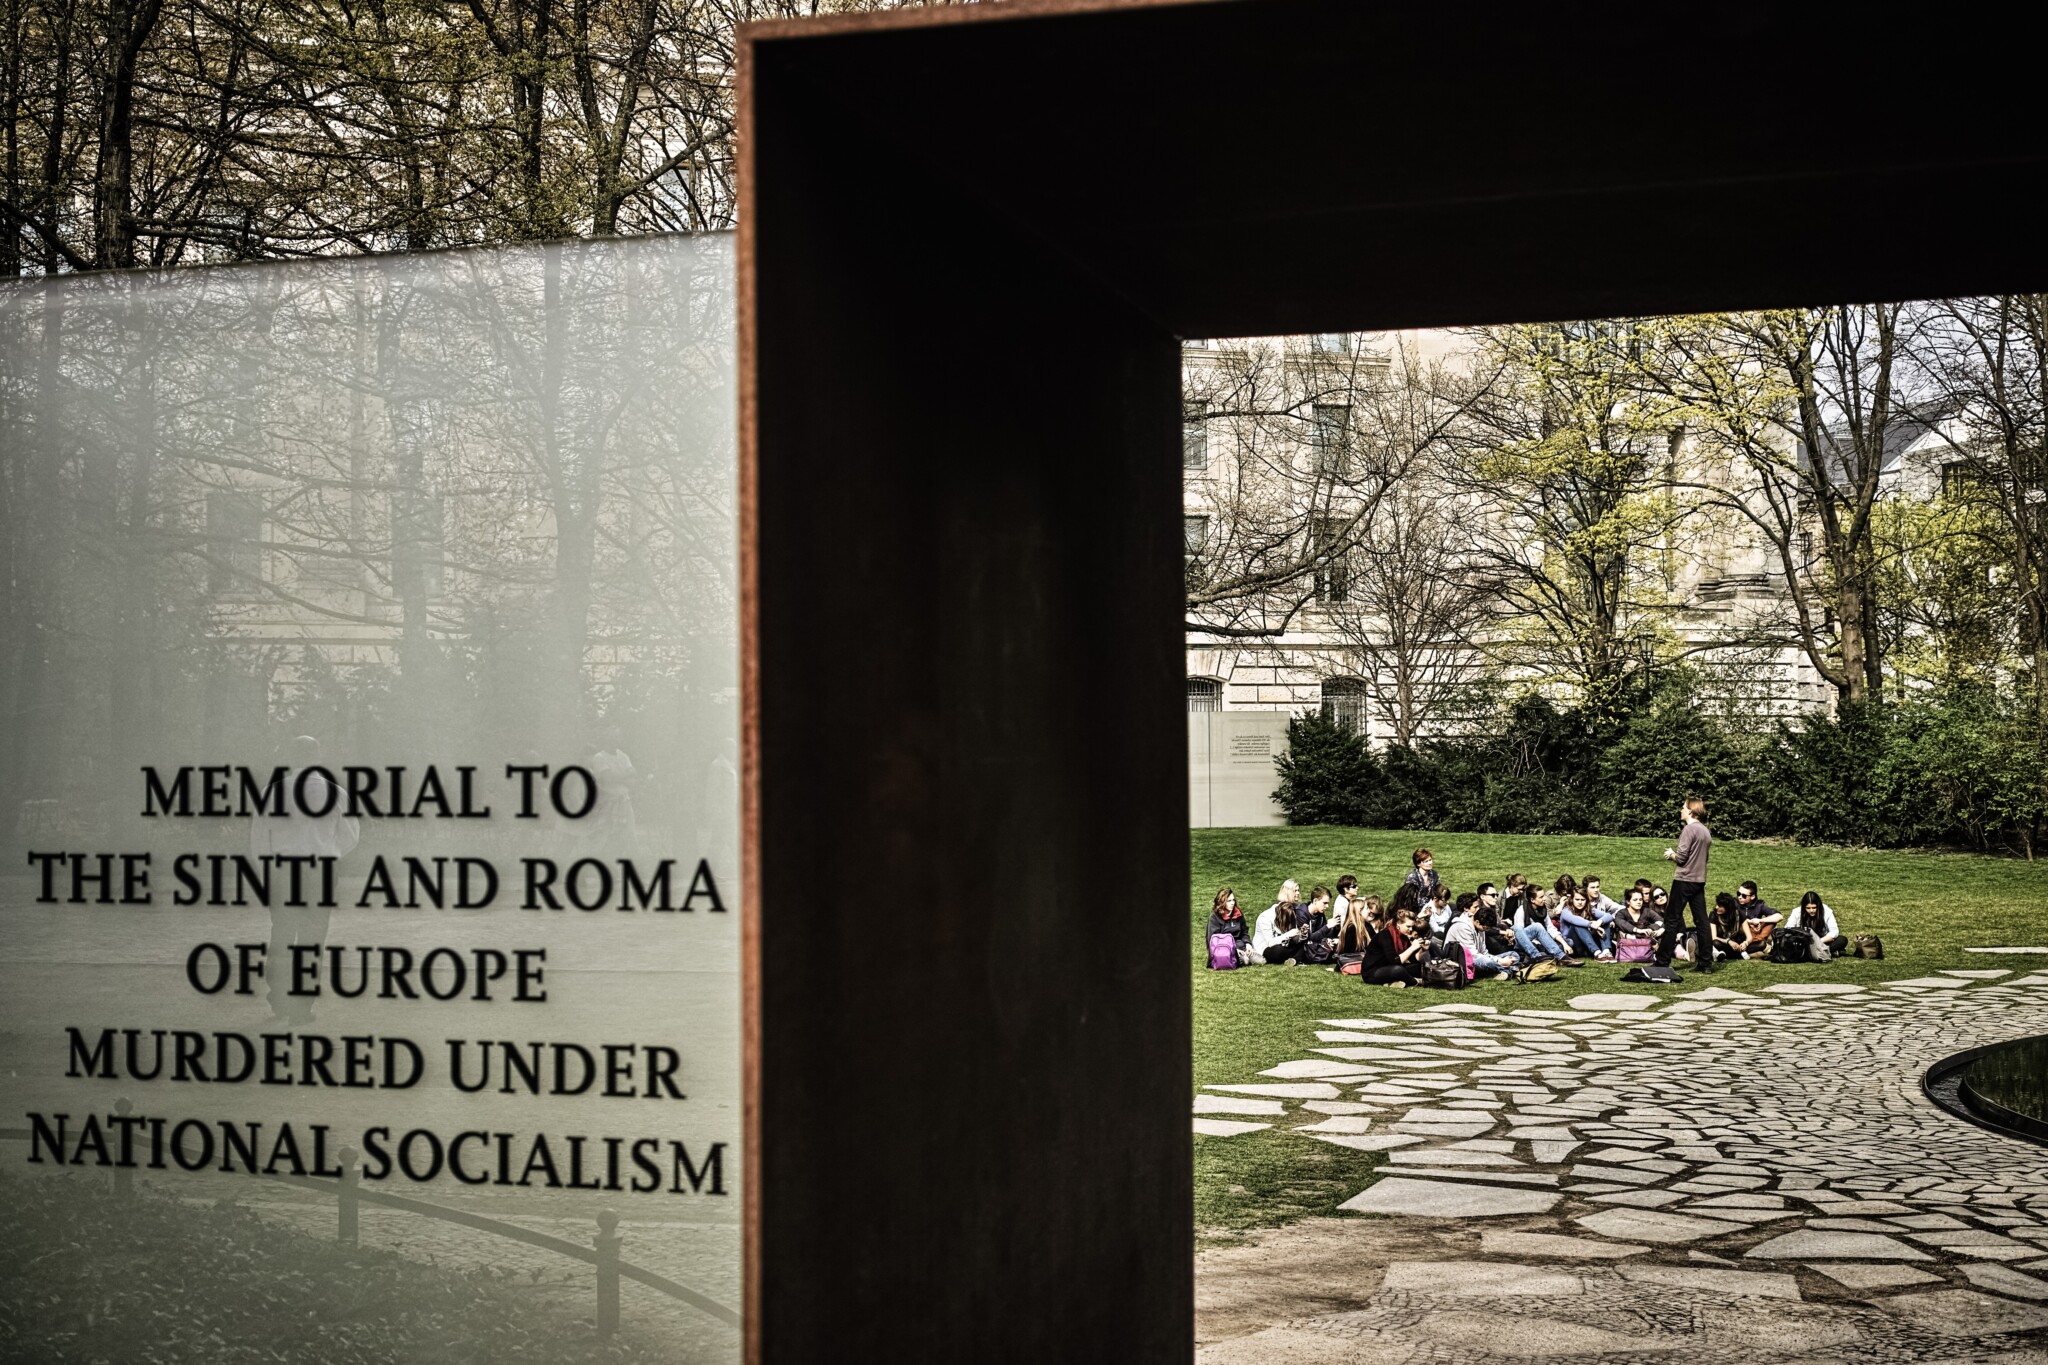 Damage to the Memorial to the Sinti and Roma of Europe Murdered under National Socialism